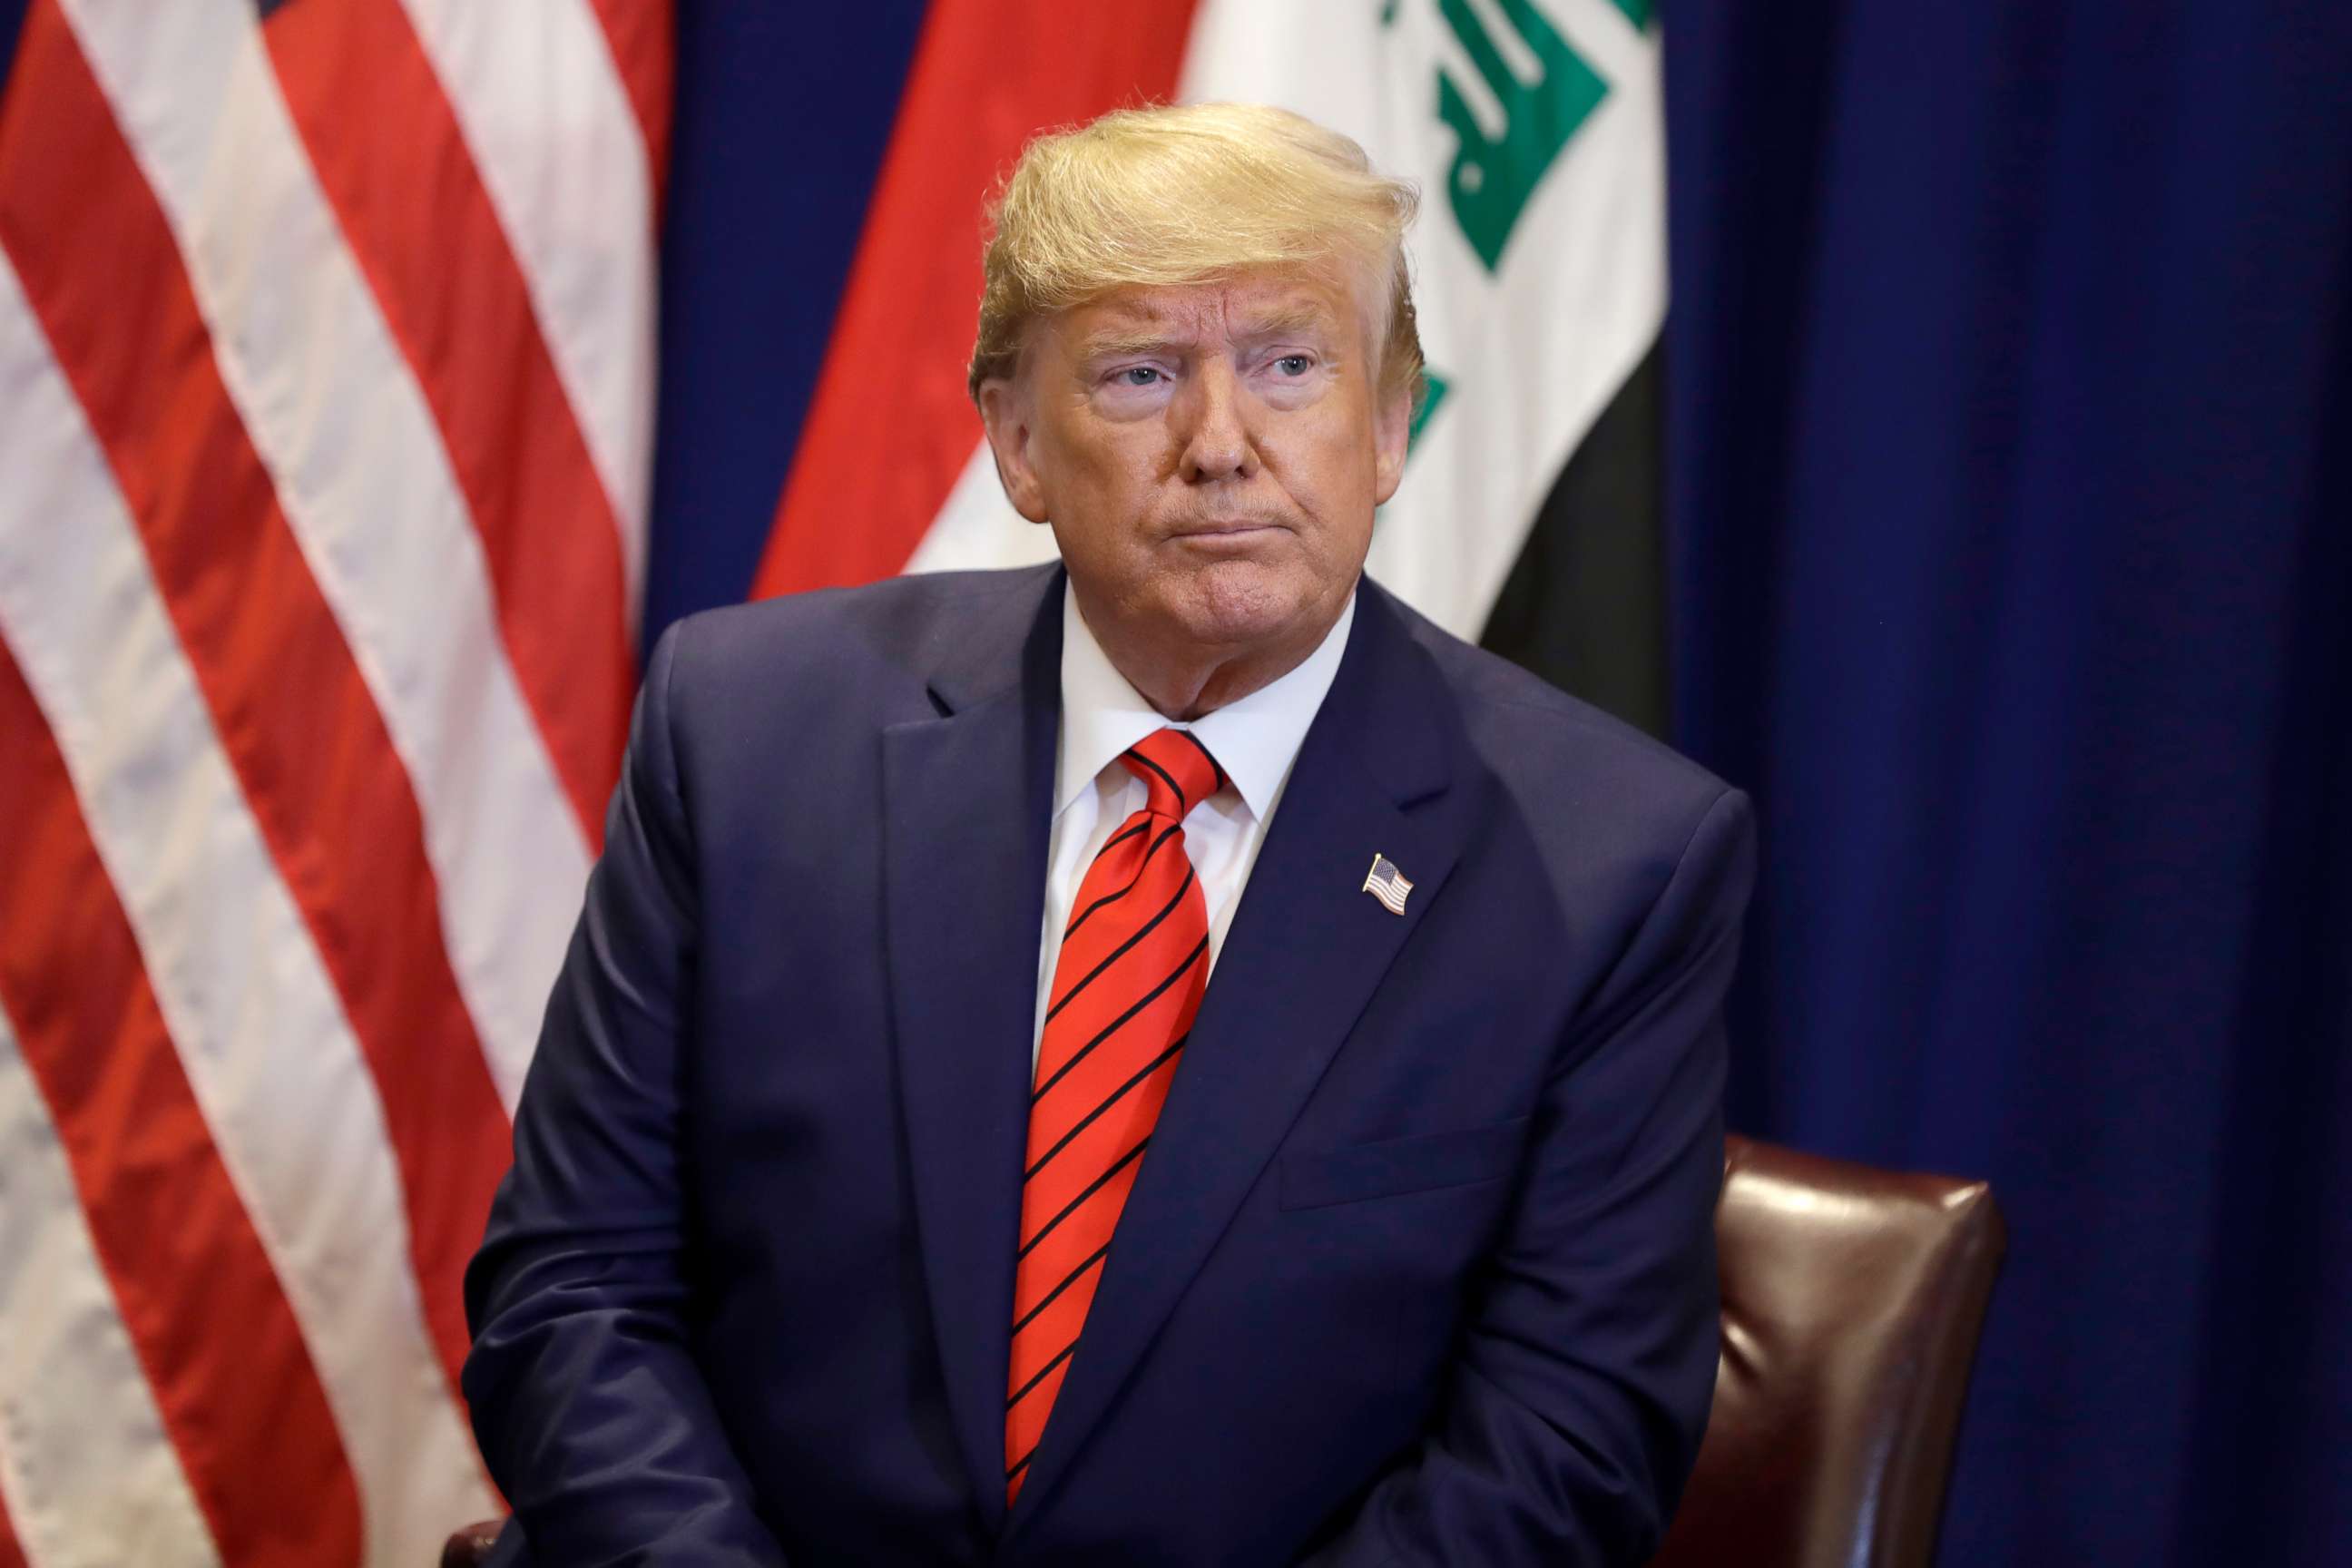 PHOTO: President Donald Trump speaks during a meeting with Iraqi President Barham Salih at the Lotte New York Palace hotel during the United Nations General Assembly, Sept. 24, 2019, in New York.